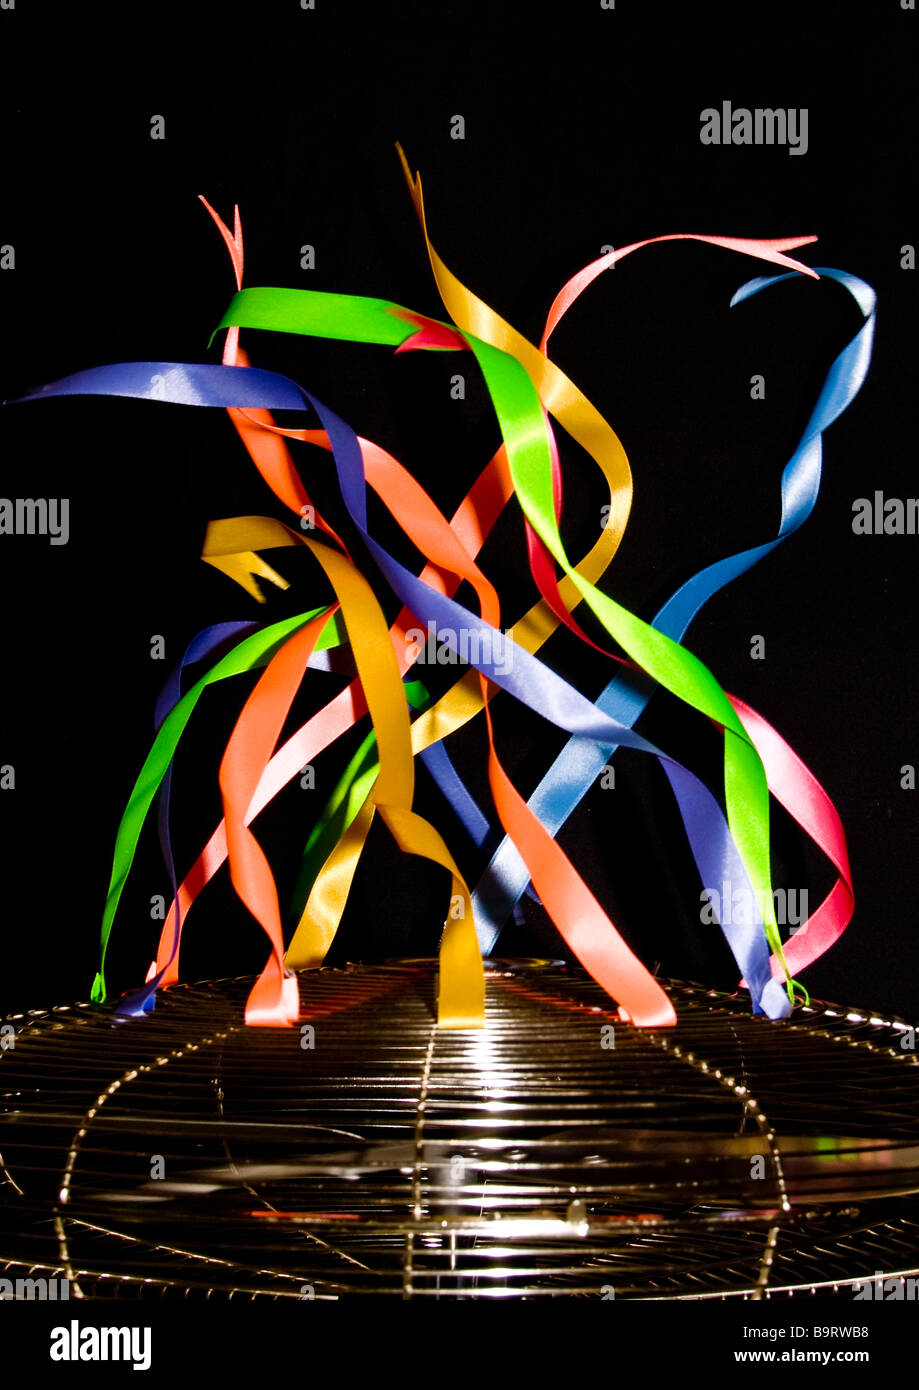 Coloured Ribbons Blowing In The Wind Stock Photo